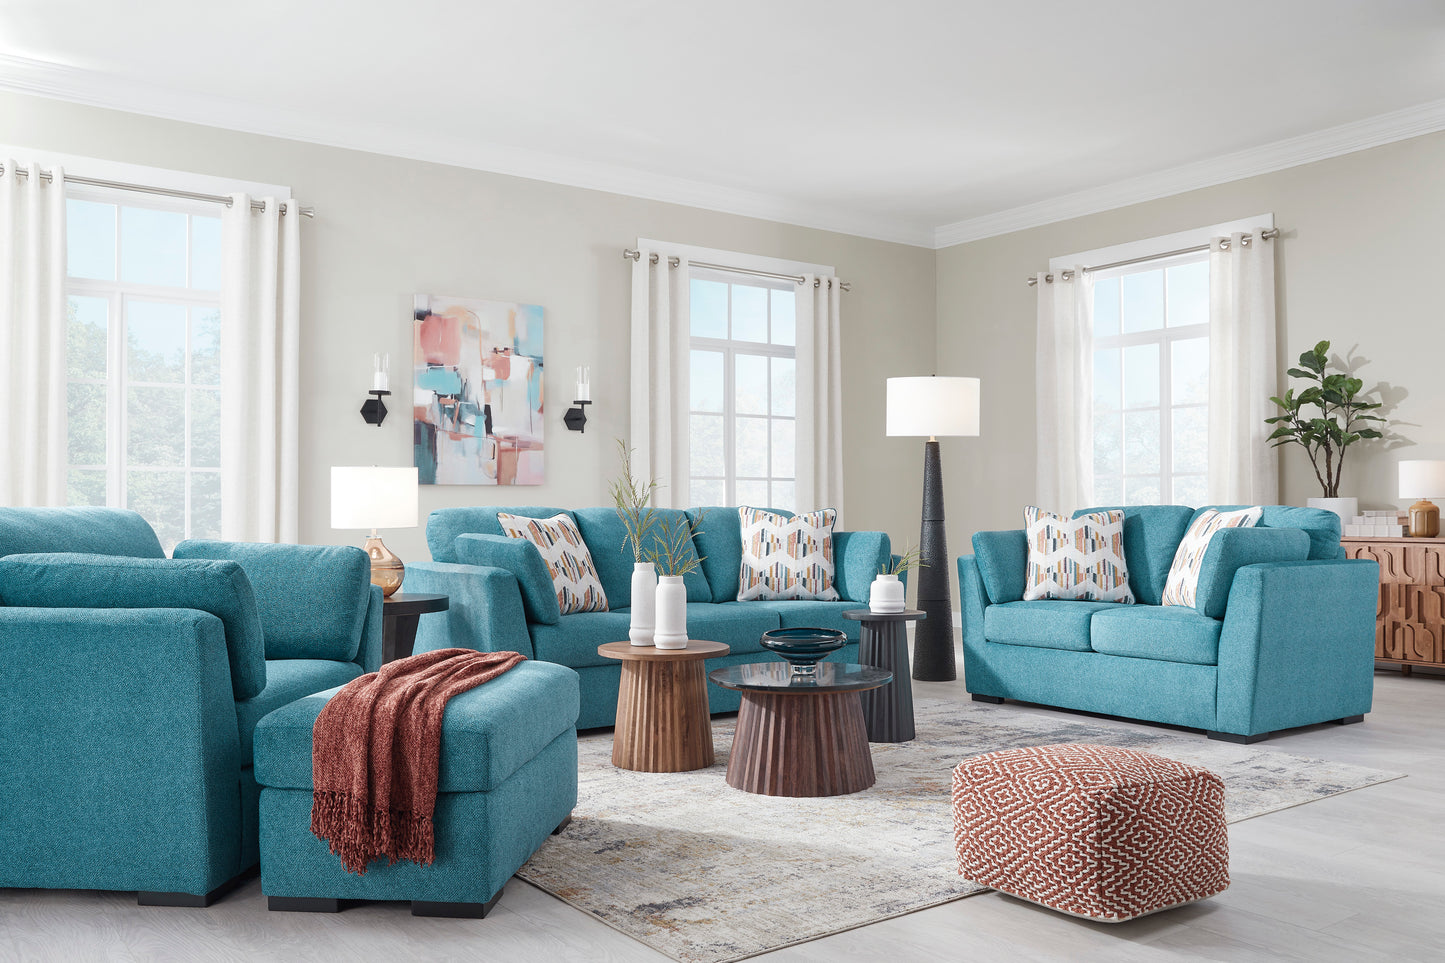 Clareen Upholstered Living Room Collection